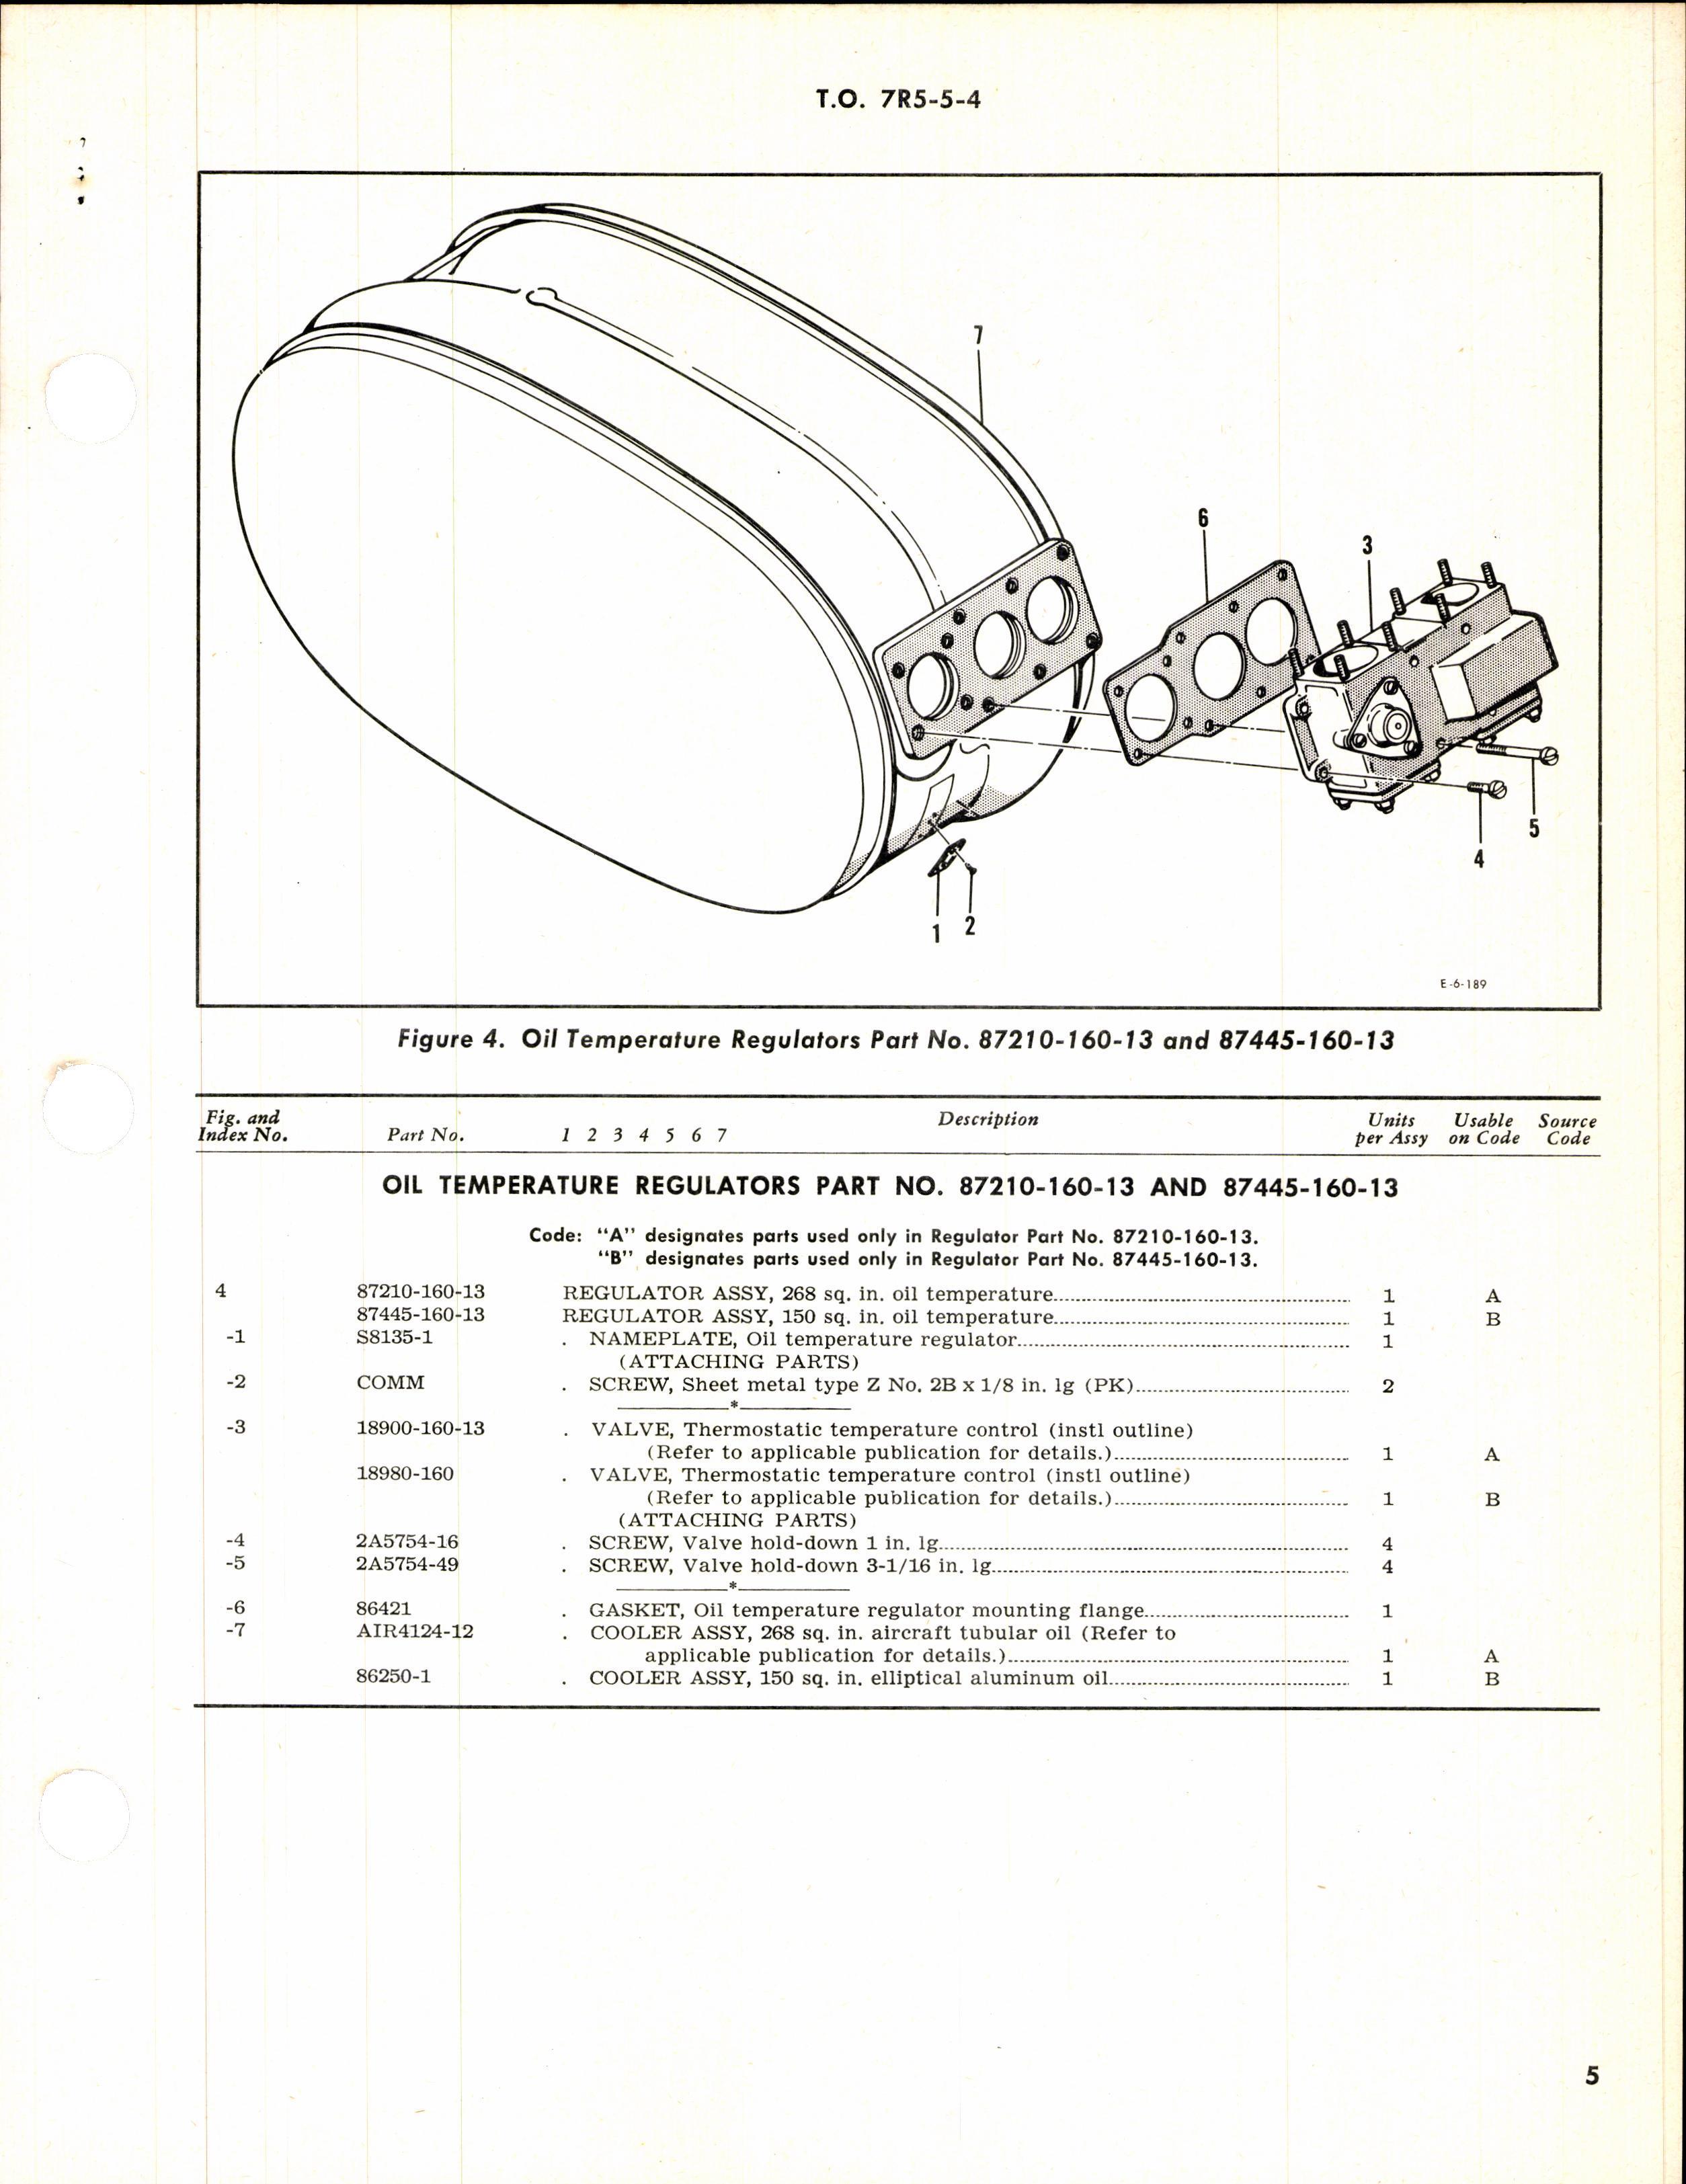 Sample page 5 from AirCorps Library document: Illustrated Parts Breakdown for Airesearch Oil Temperature Regulators